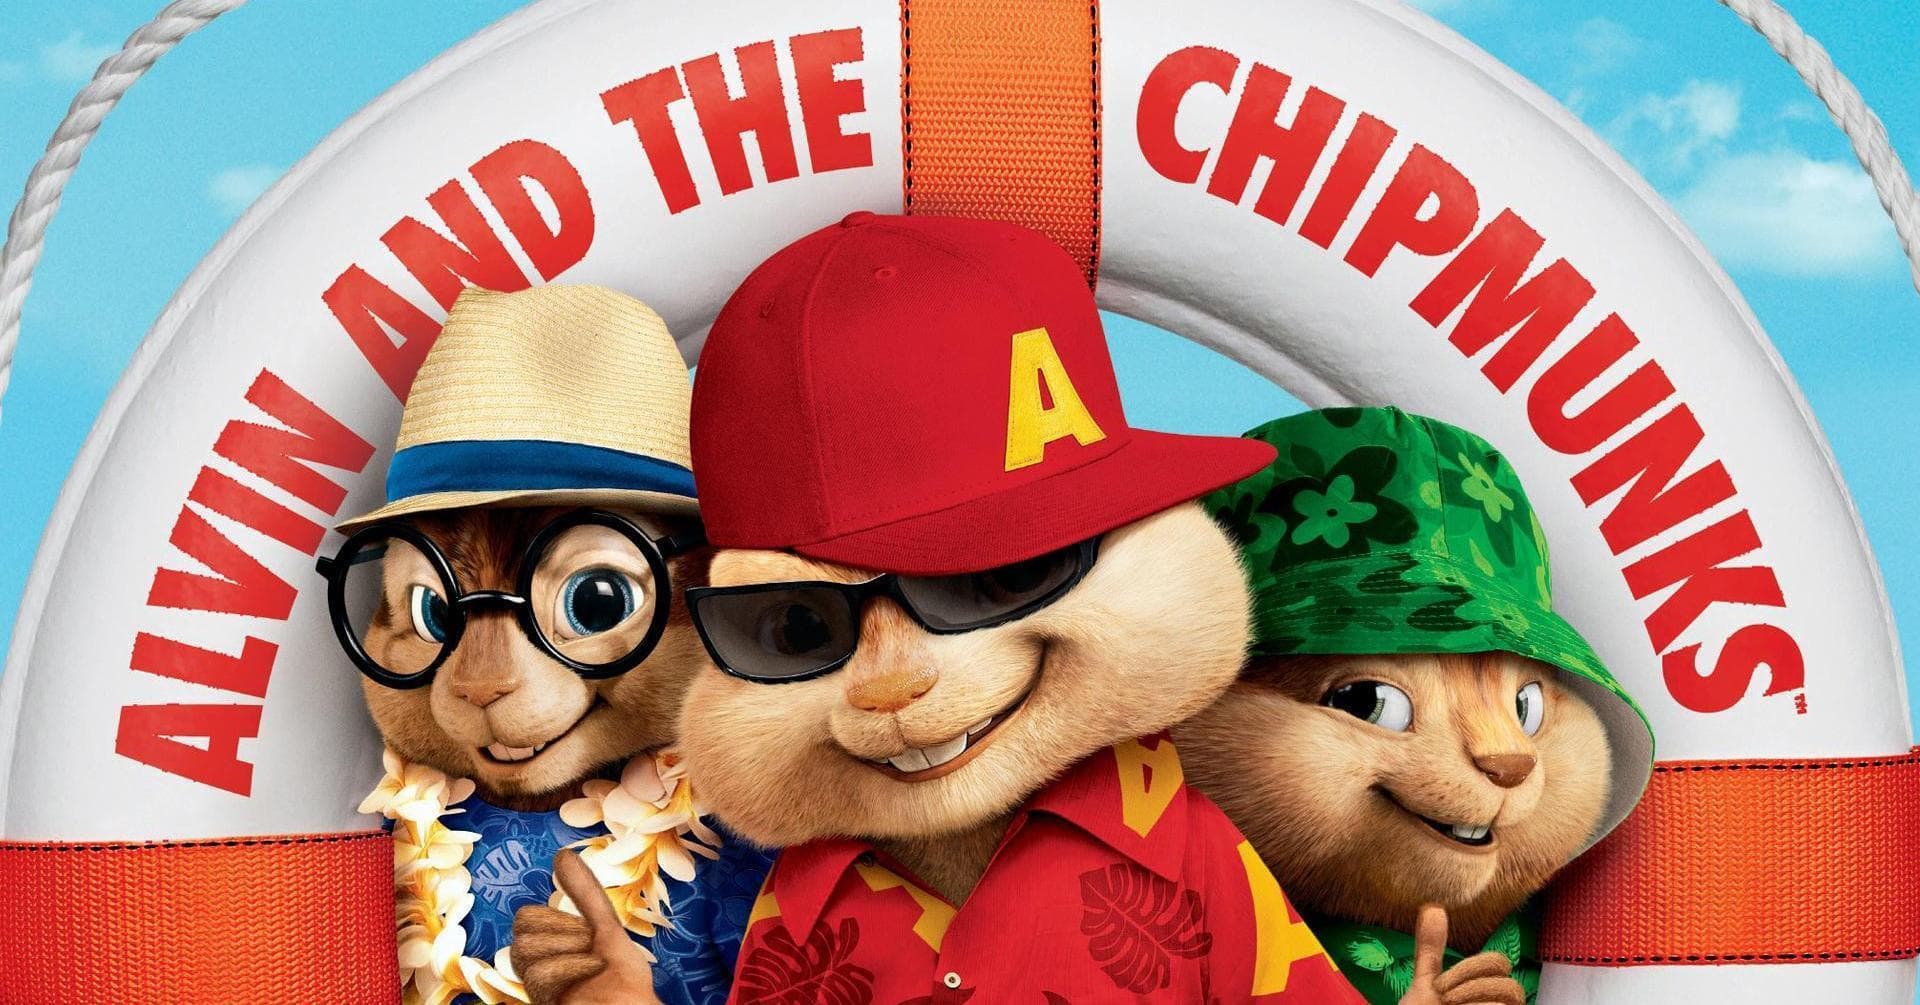 Chipwrecked Movie Quotes: List of Alvin and the Chipmunks Funny Quotes